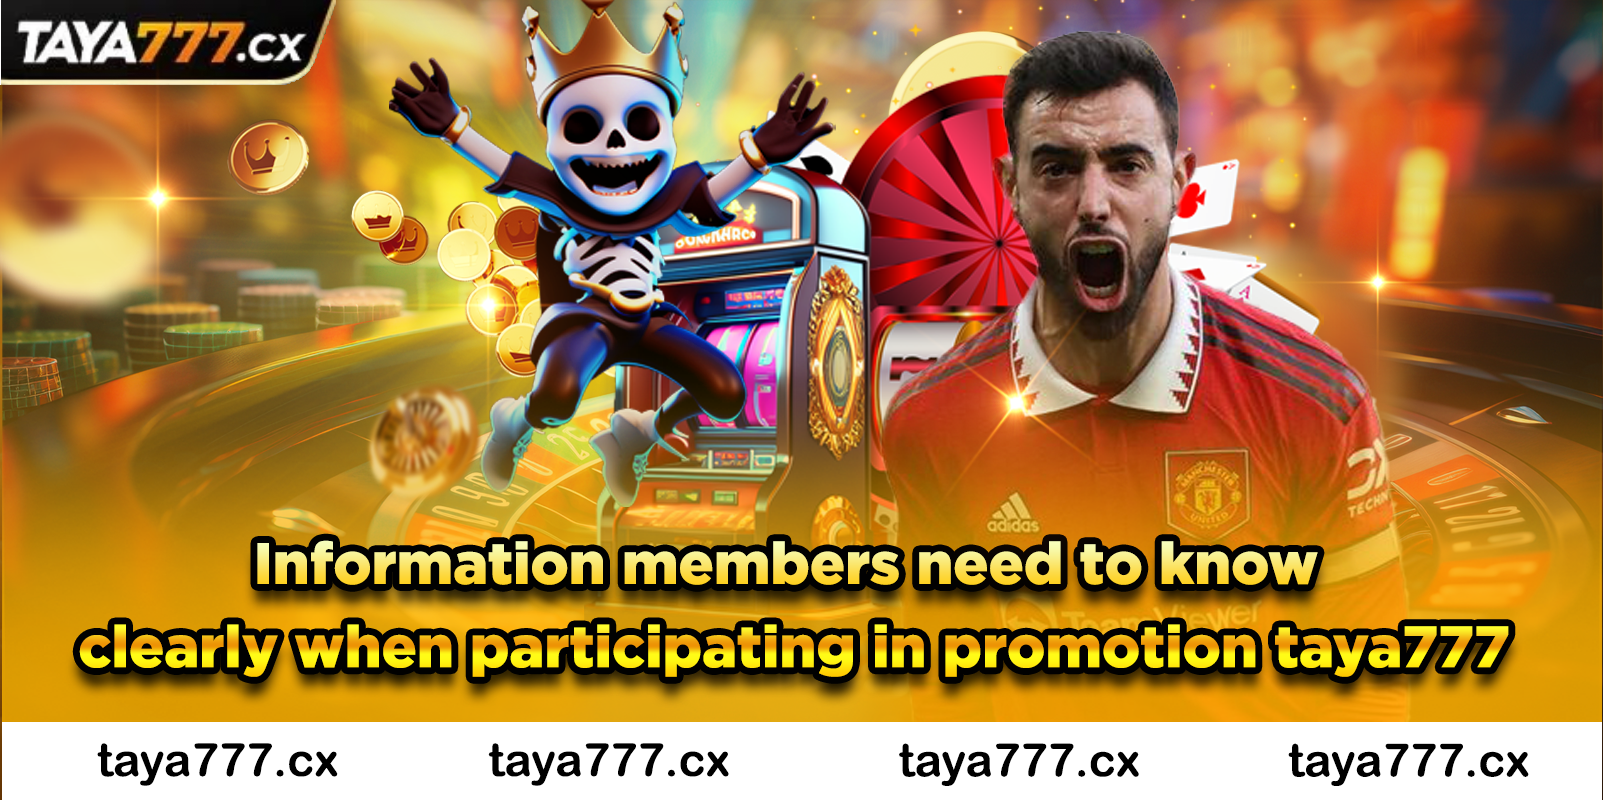 Information members need to know clearly when participating in promotion taya777